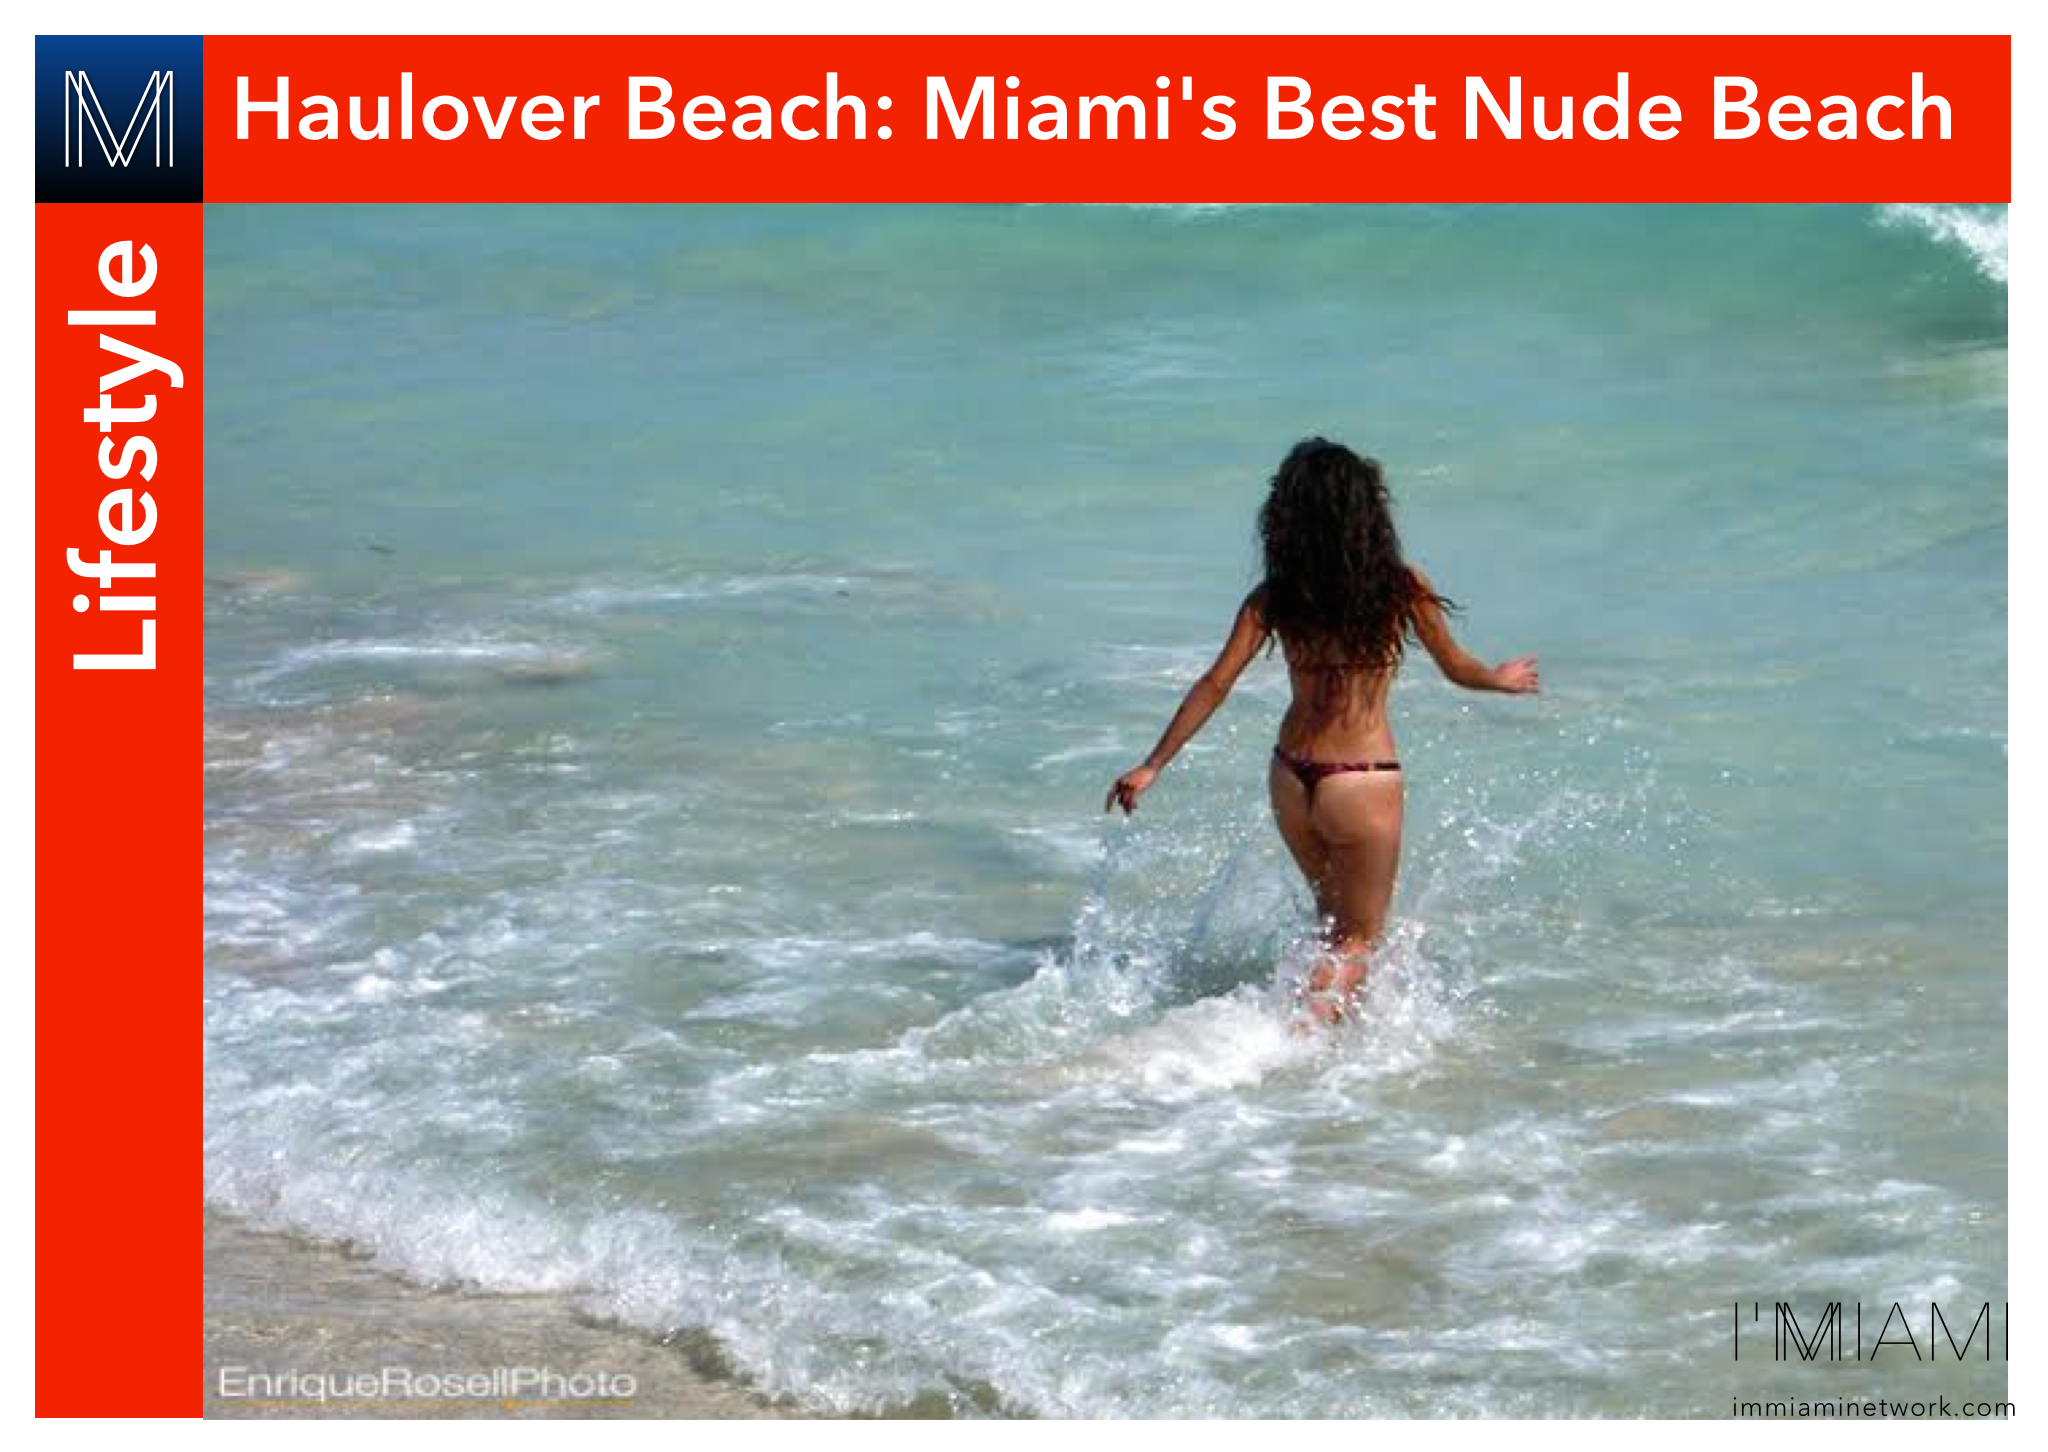 divine grace reyes recommends haulover nudist beach miami pic